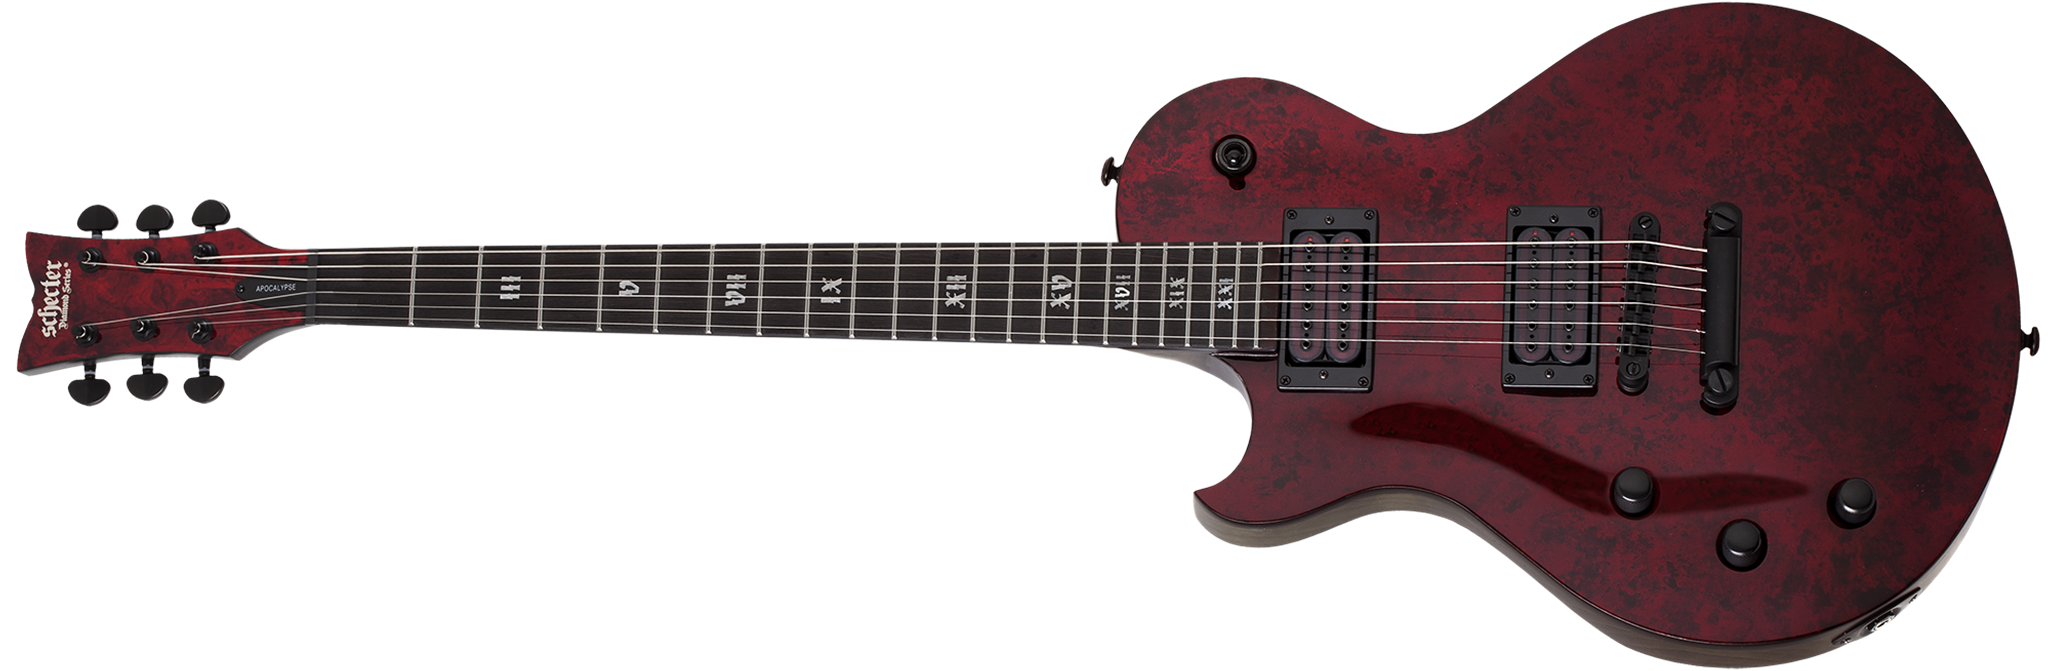 Schecter DIAMOND SERIES Solo-II  Apocalypse Red Reign Left Handed 6-String Electric Guitar  